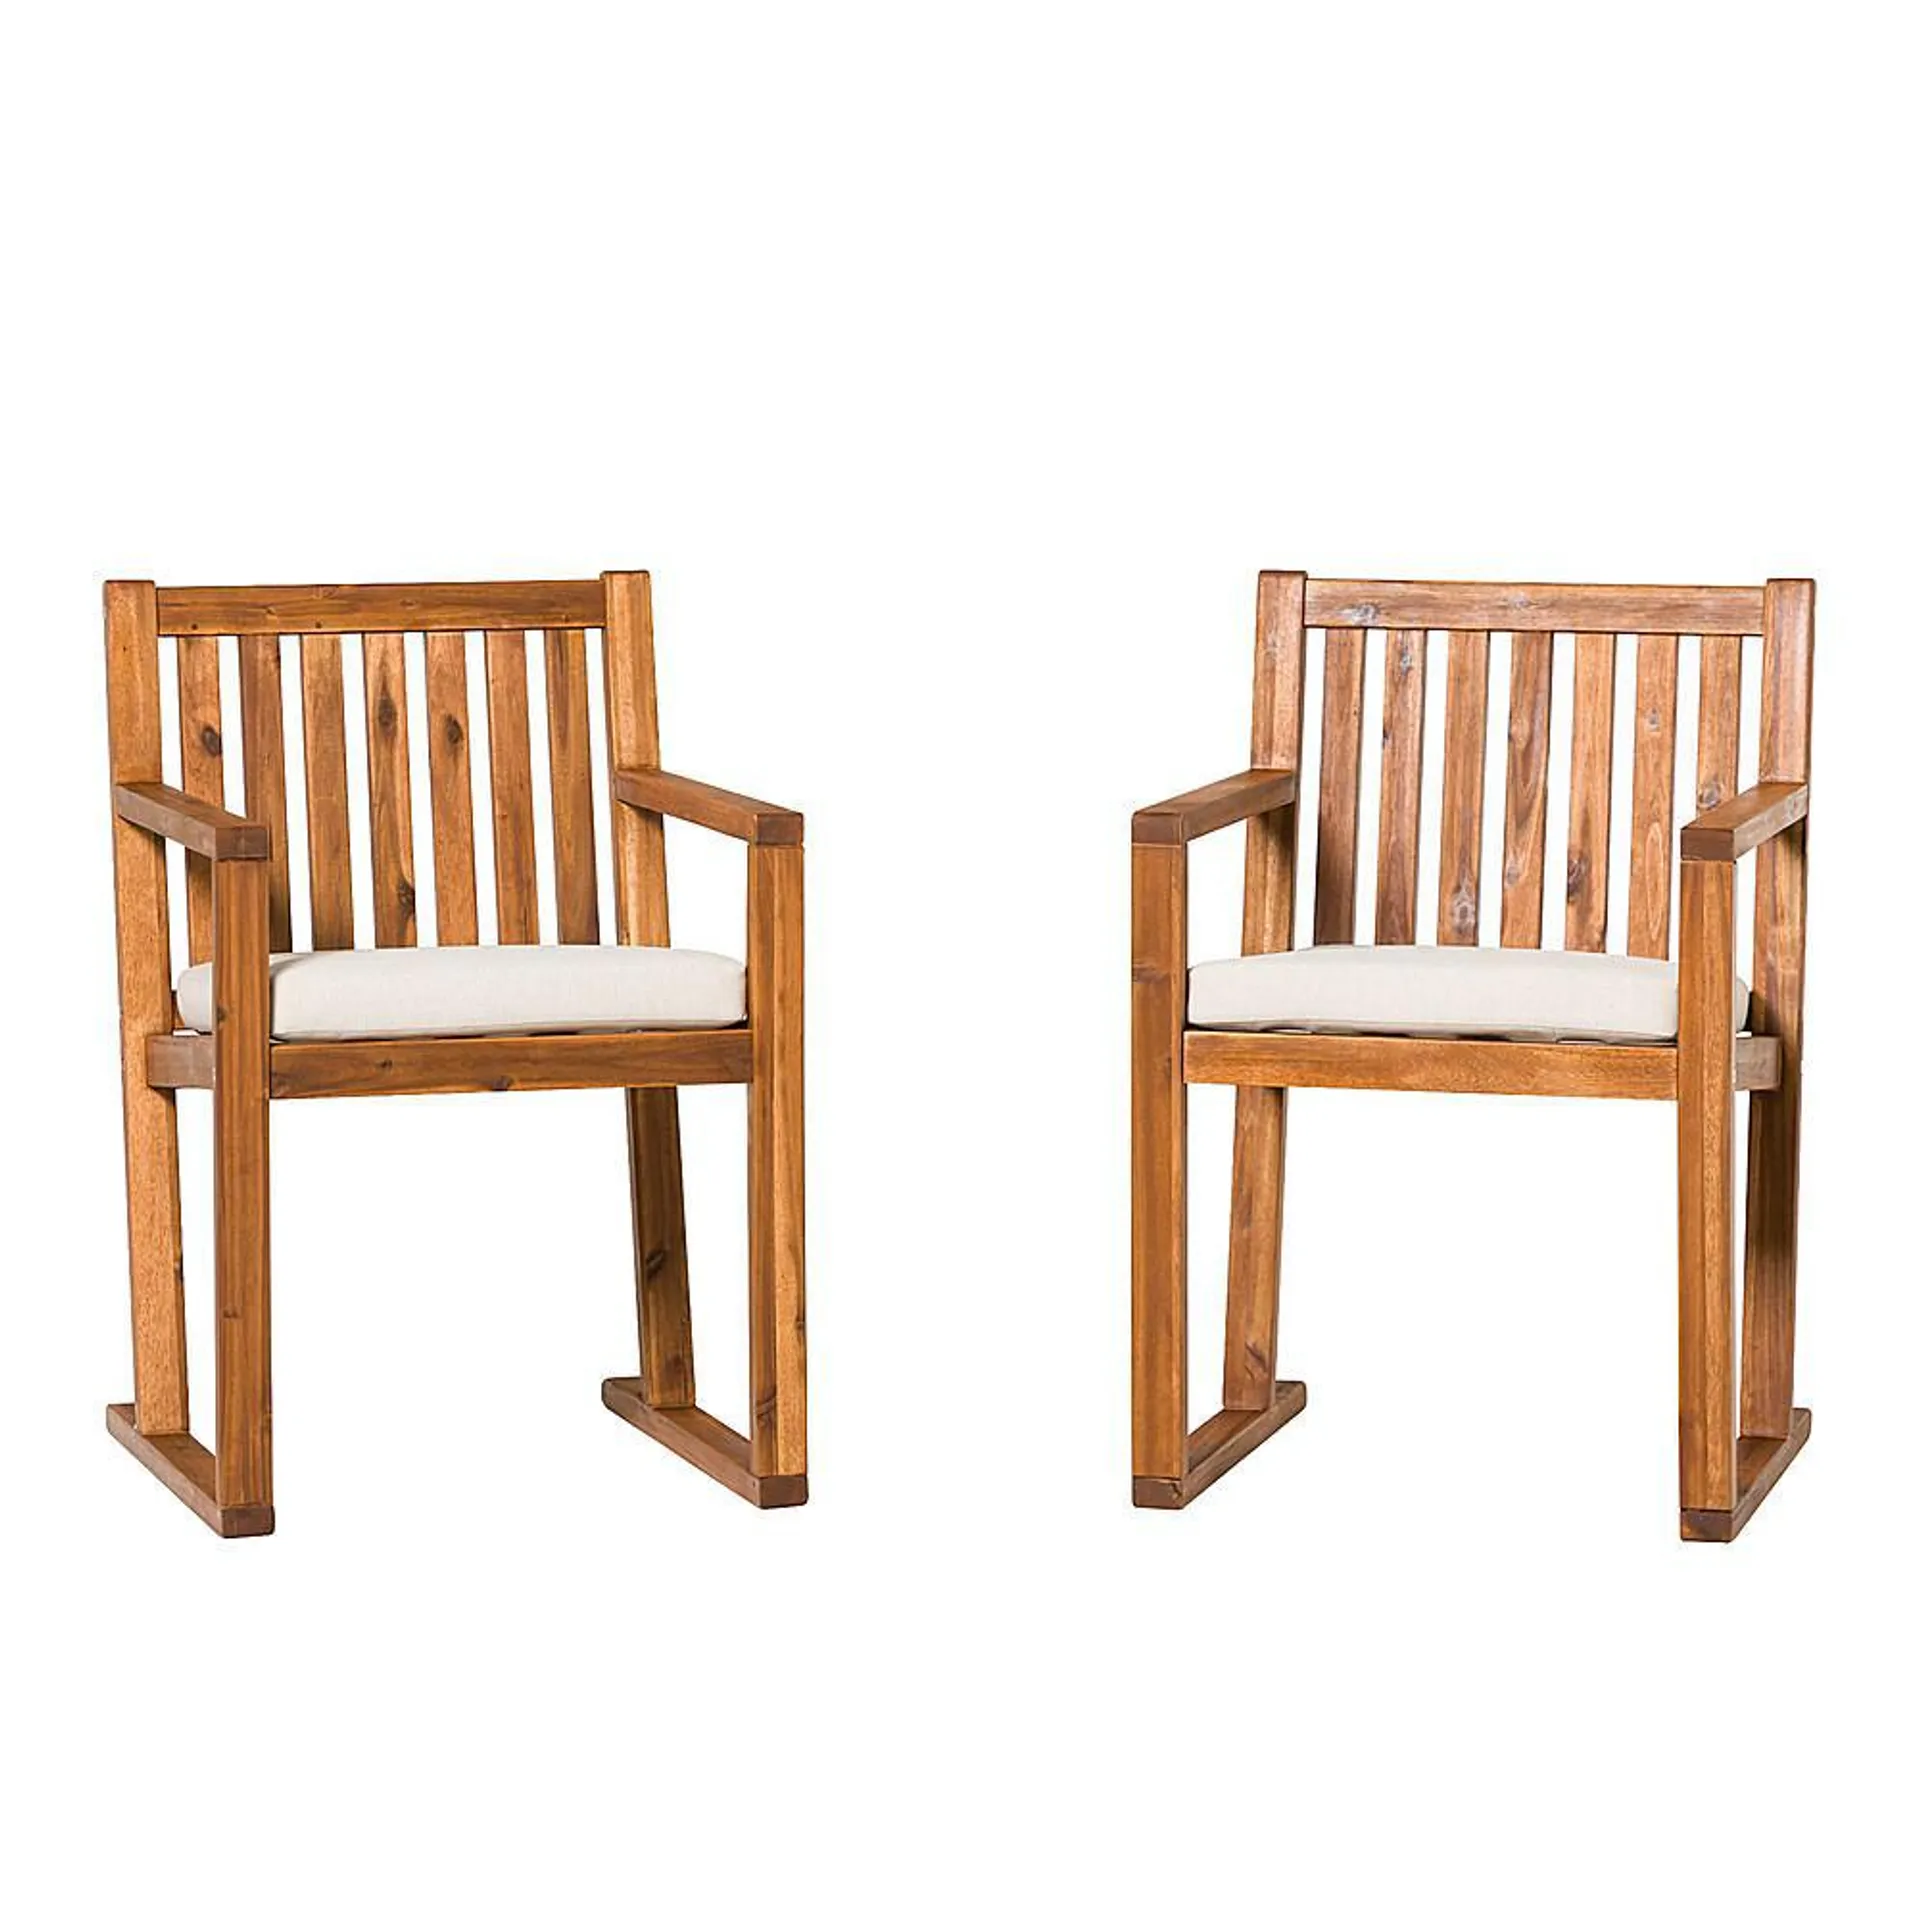 Walker Edison - Modern Solid Wood 2-Piece Slatted Outdoor Dining Chair Set - Brown